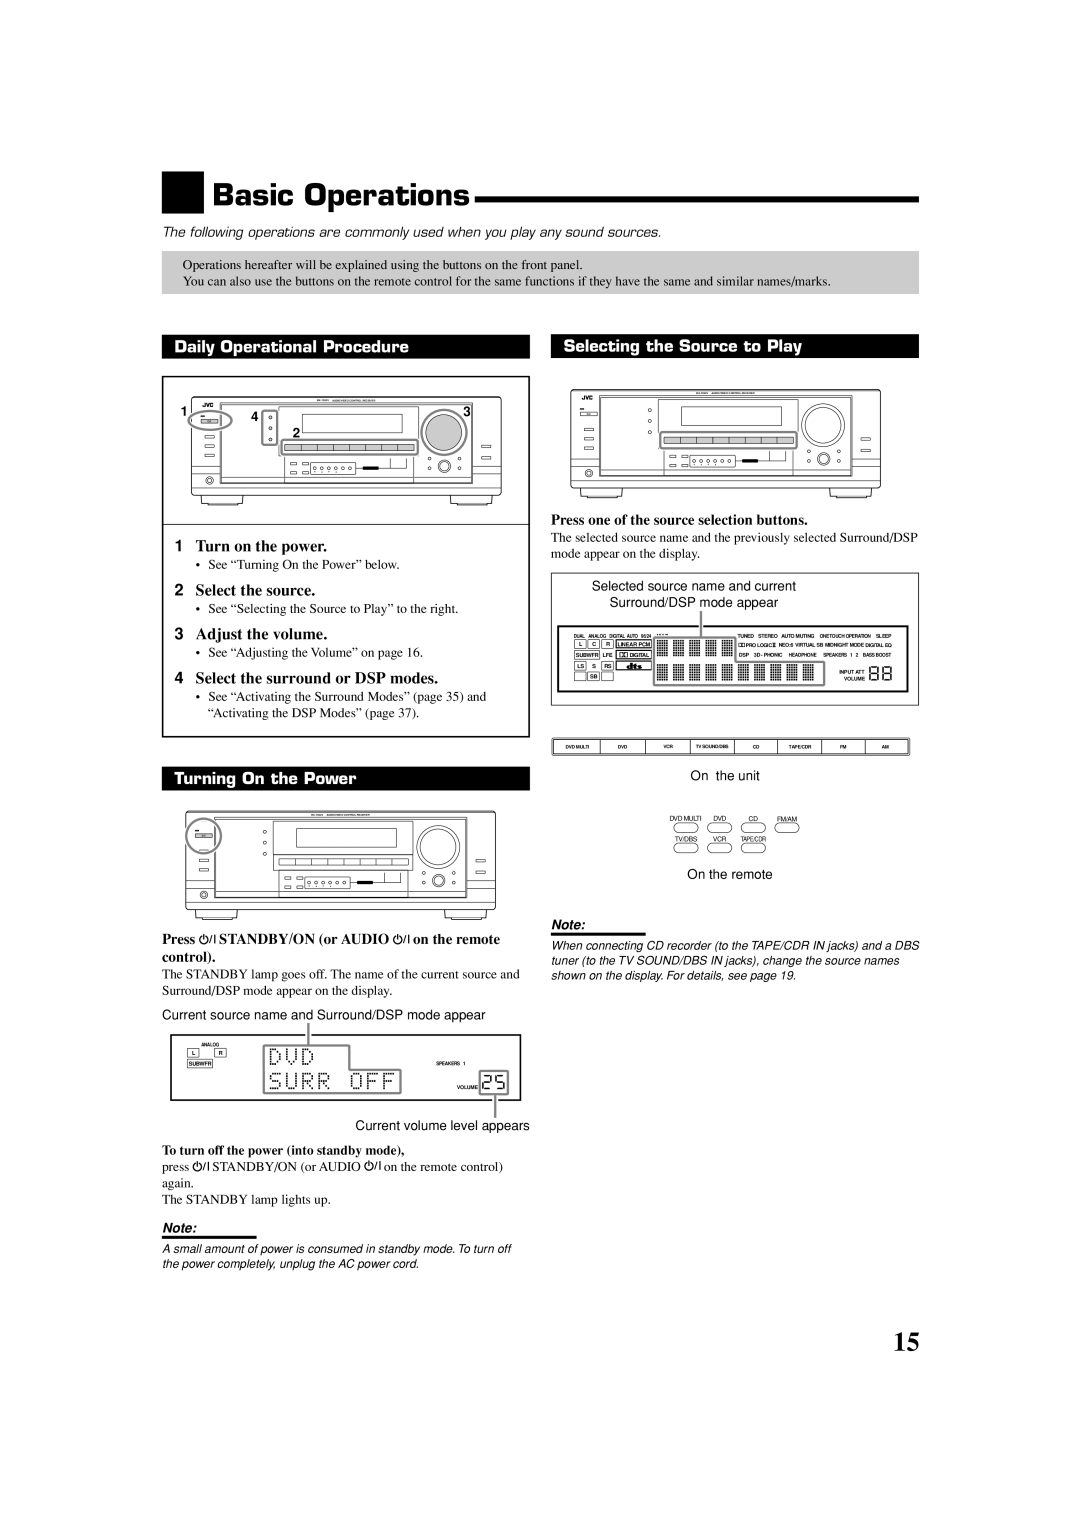 JVC LVT1007-010A[A] manual Basic Operations, Daily Operational Procedure, Selecting the Source to Play, 1Turn on the power 